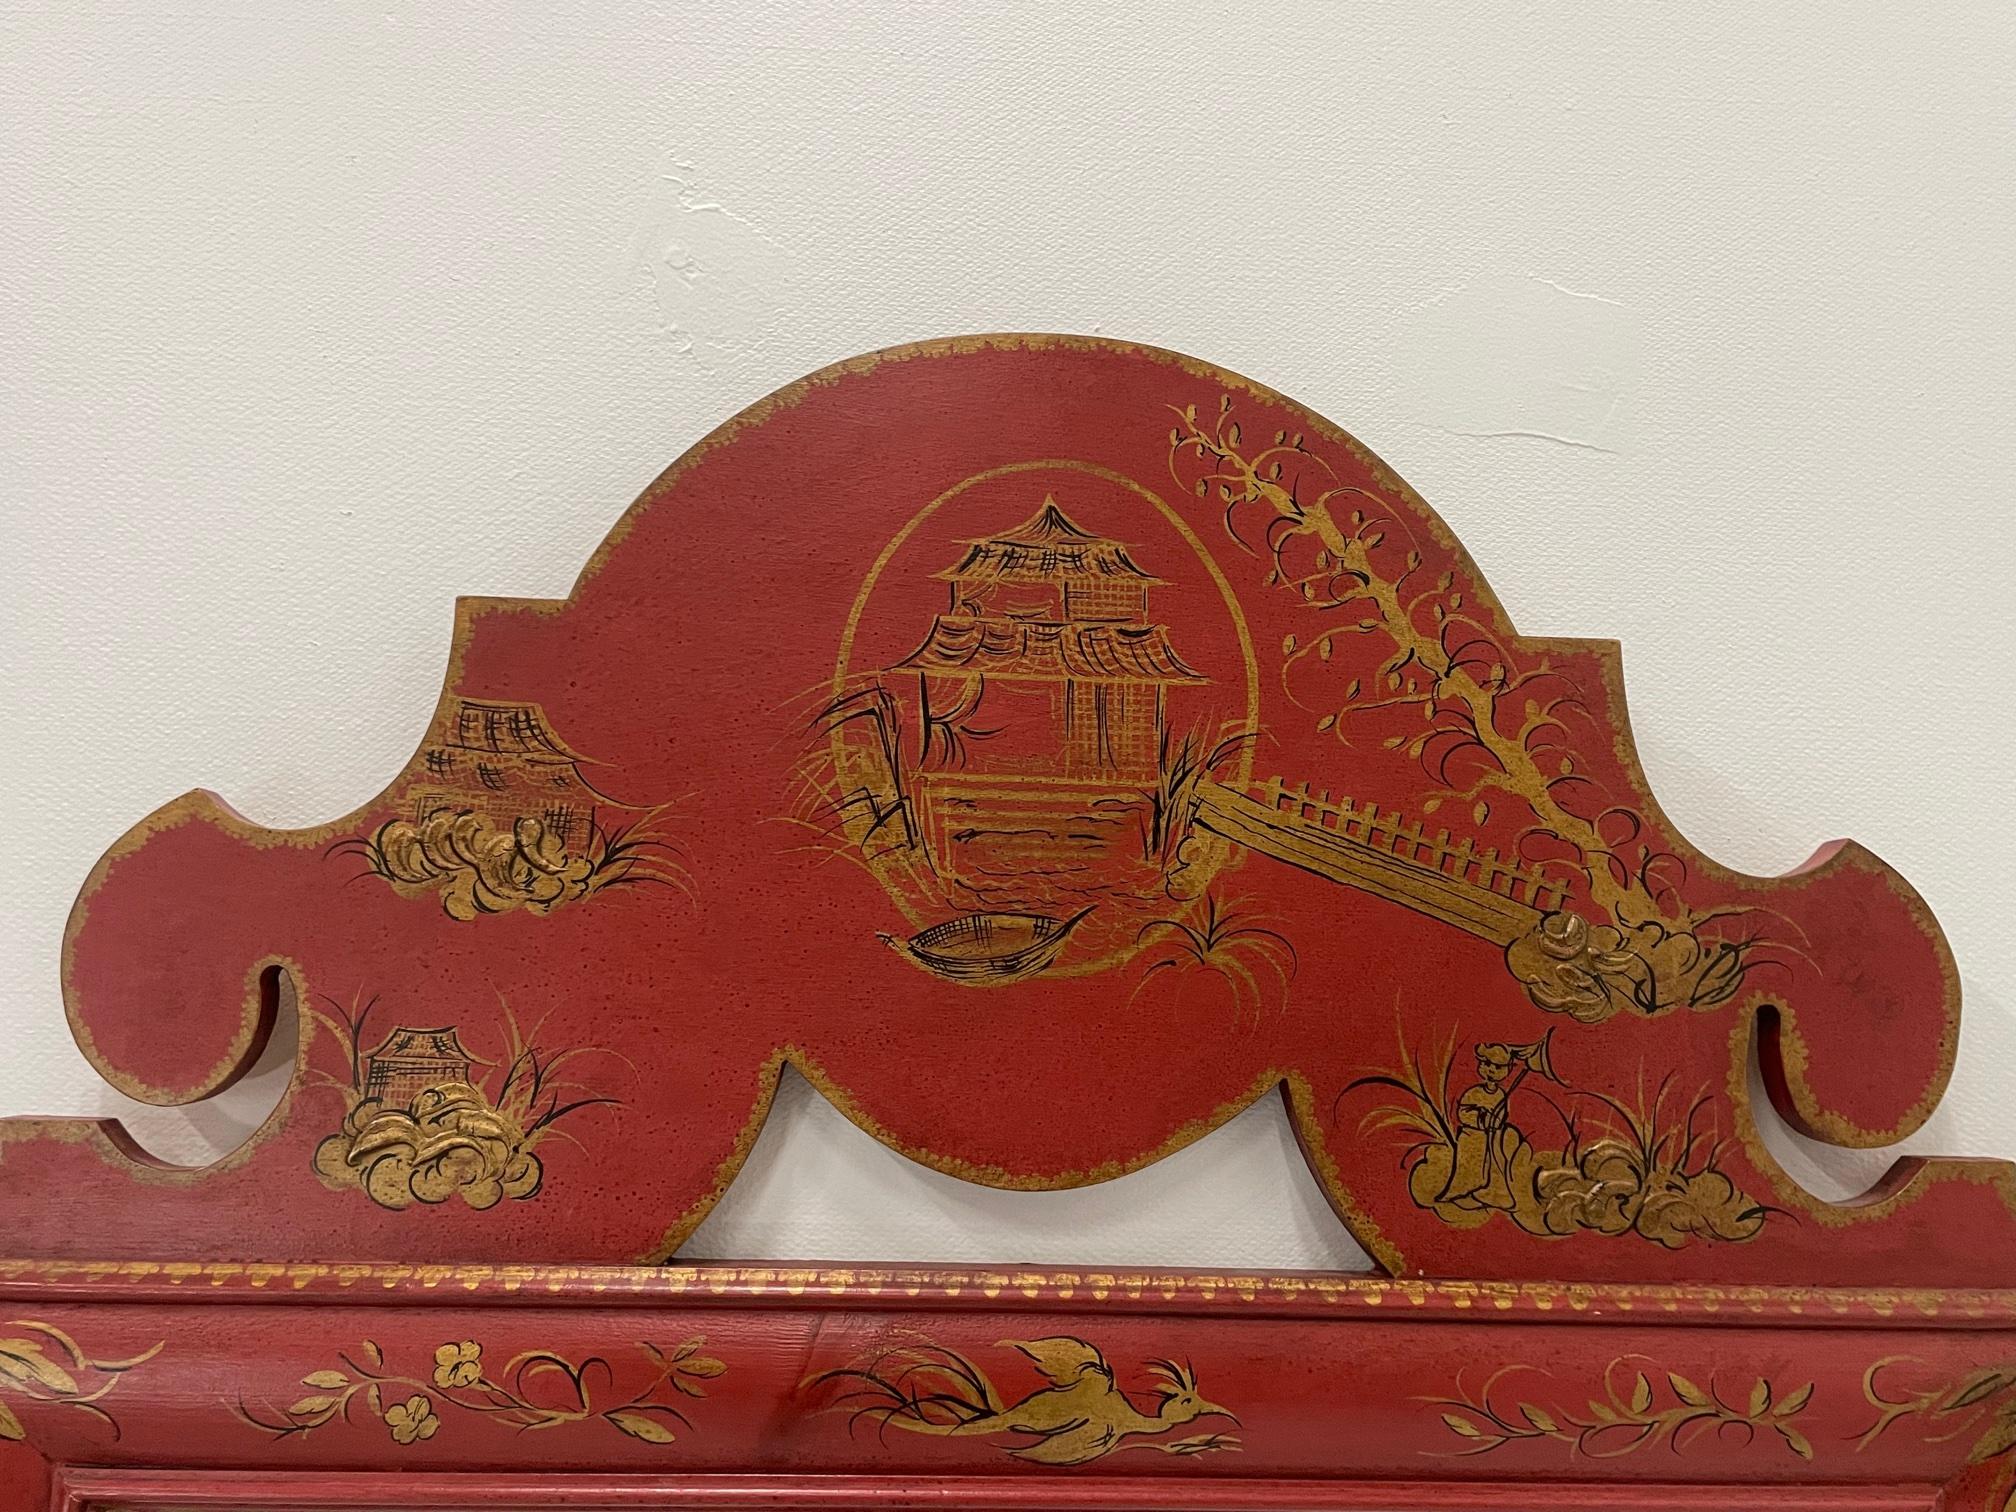 Glamorous large lucky red Italian mirror having gold chinoiserie painted decoration and pagoda-esque top.